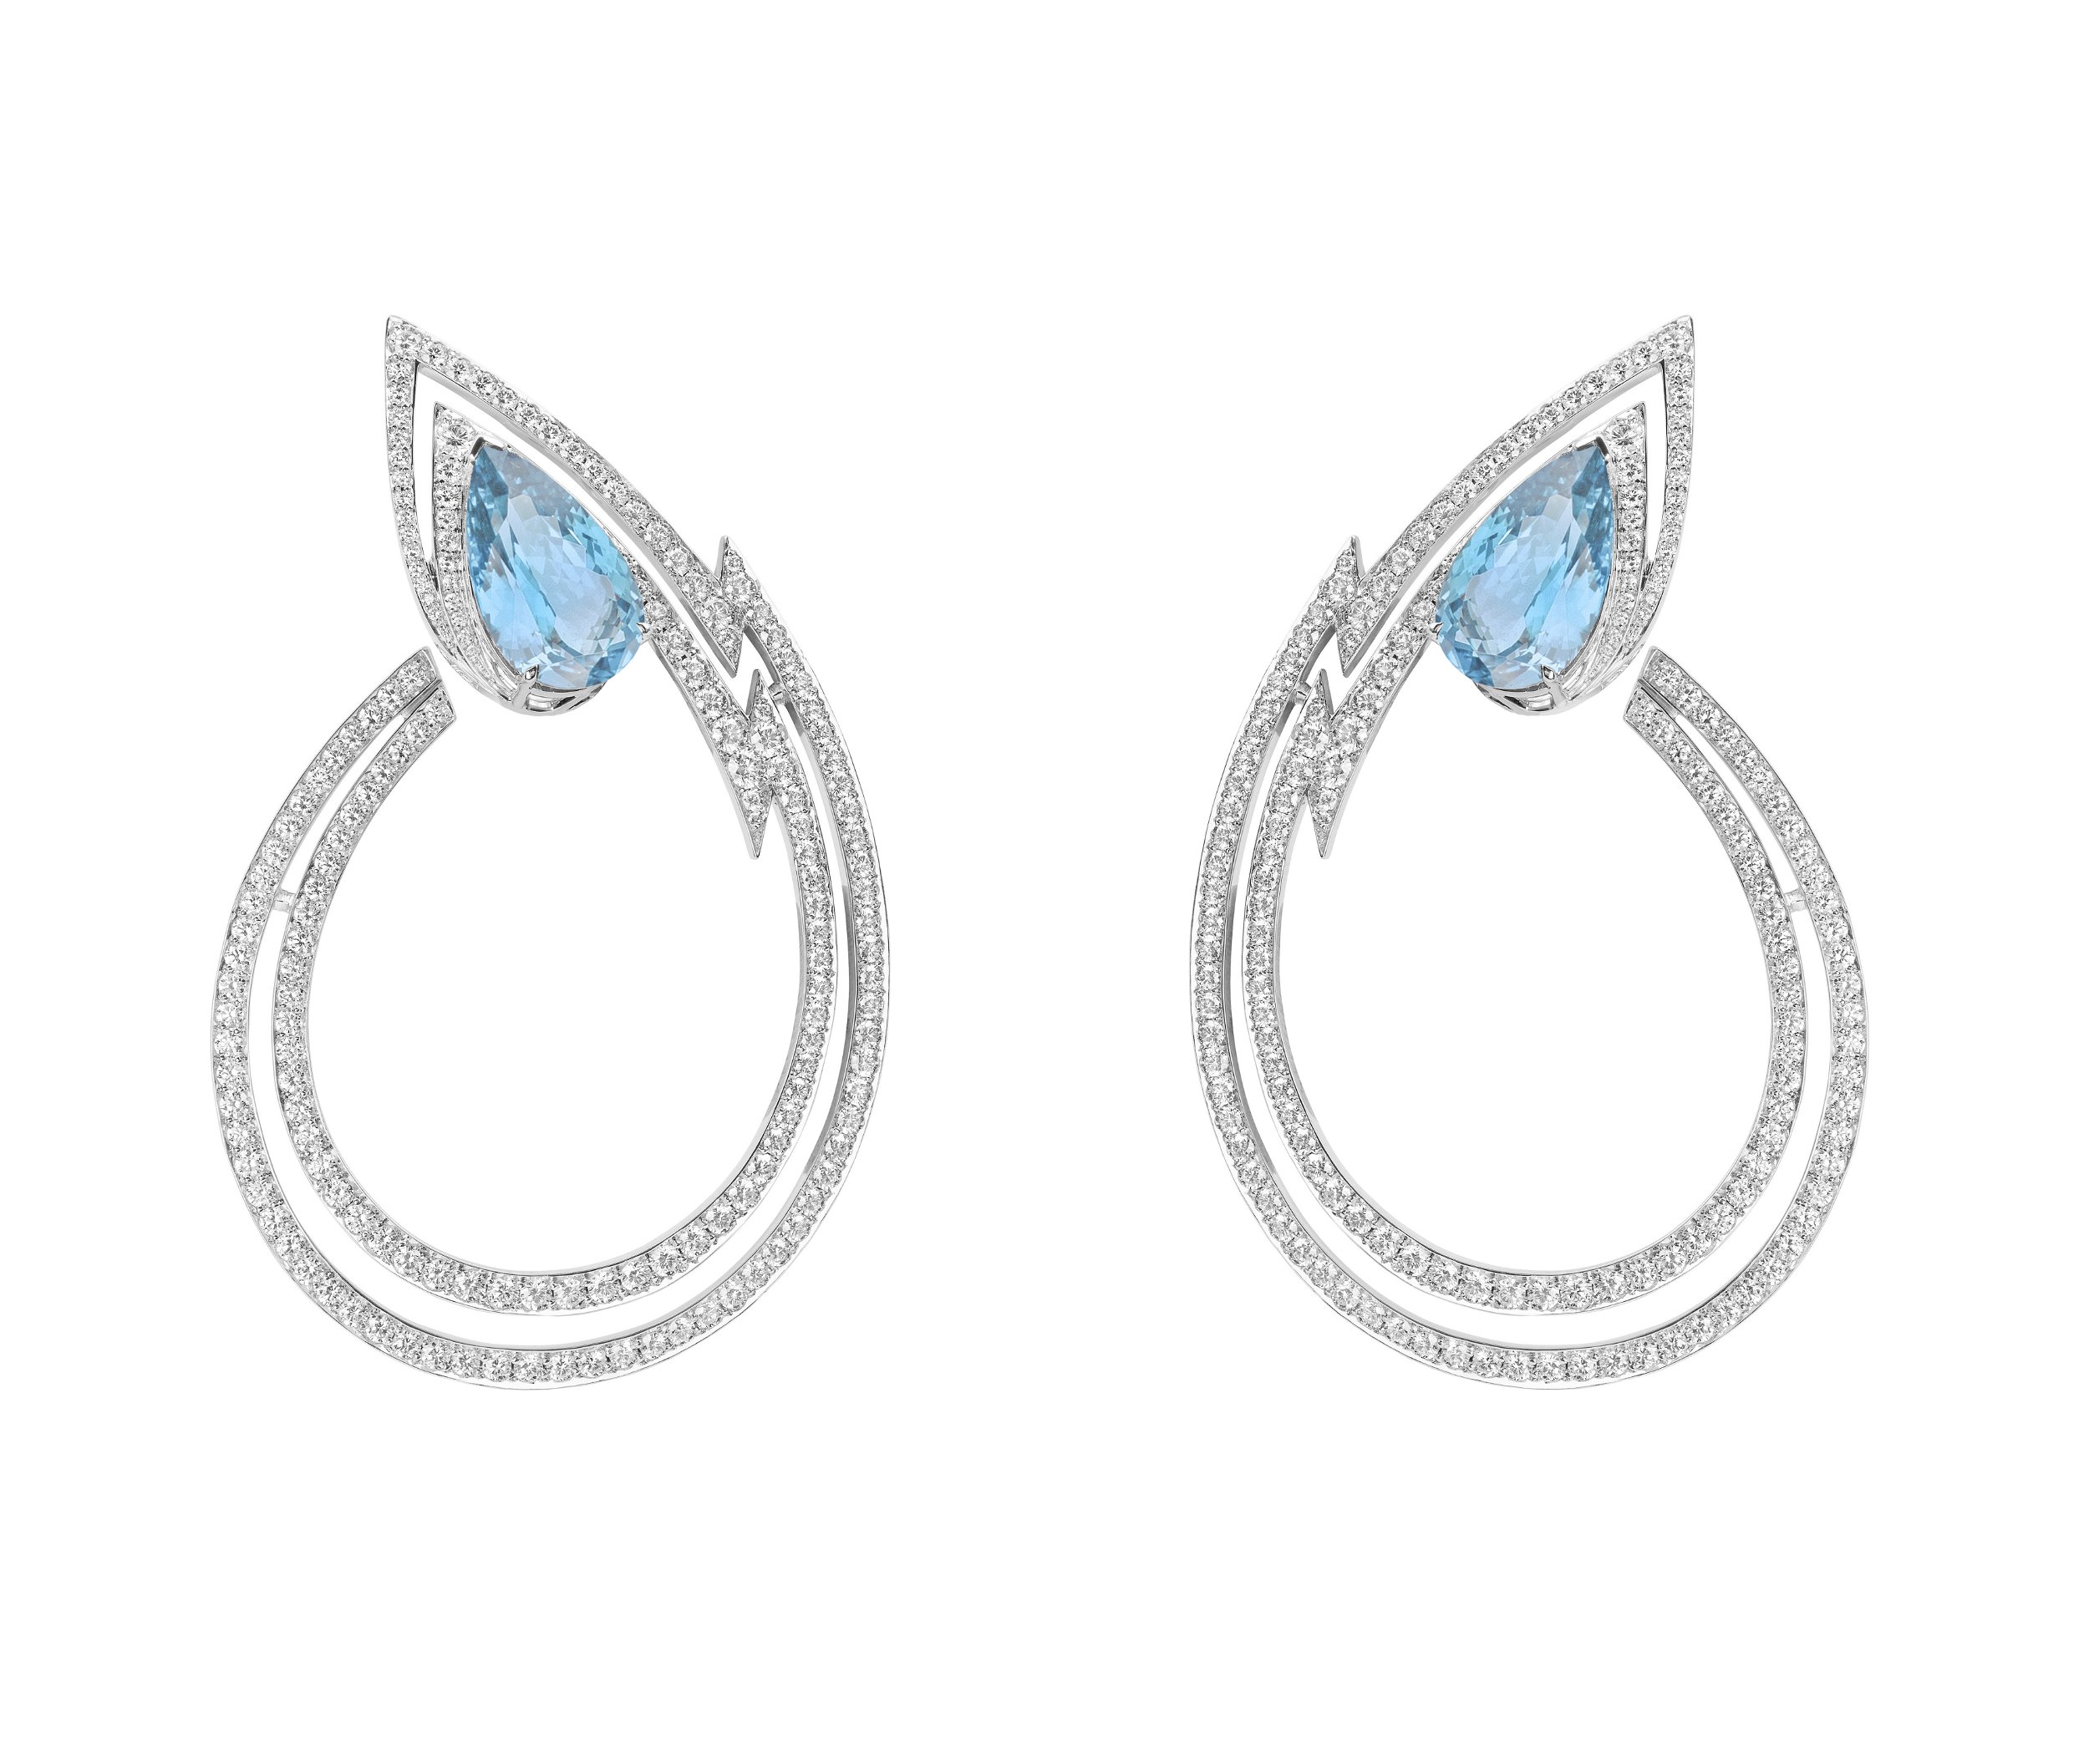 Lady Stardust Couture Earrings with Aquamarine and White Diamonds in 18kt White Gold